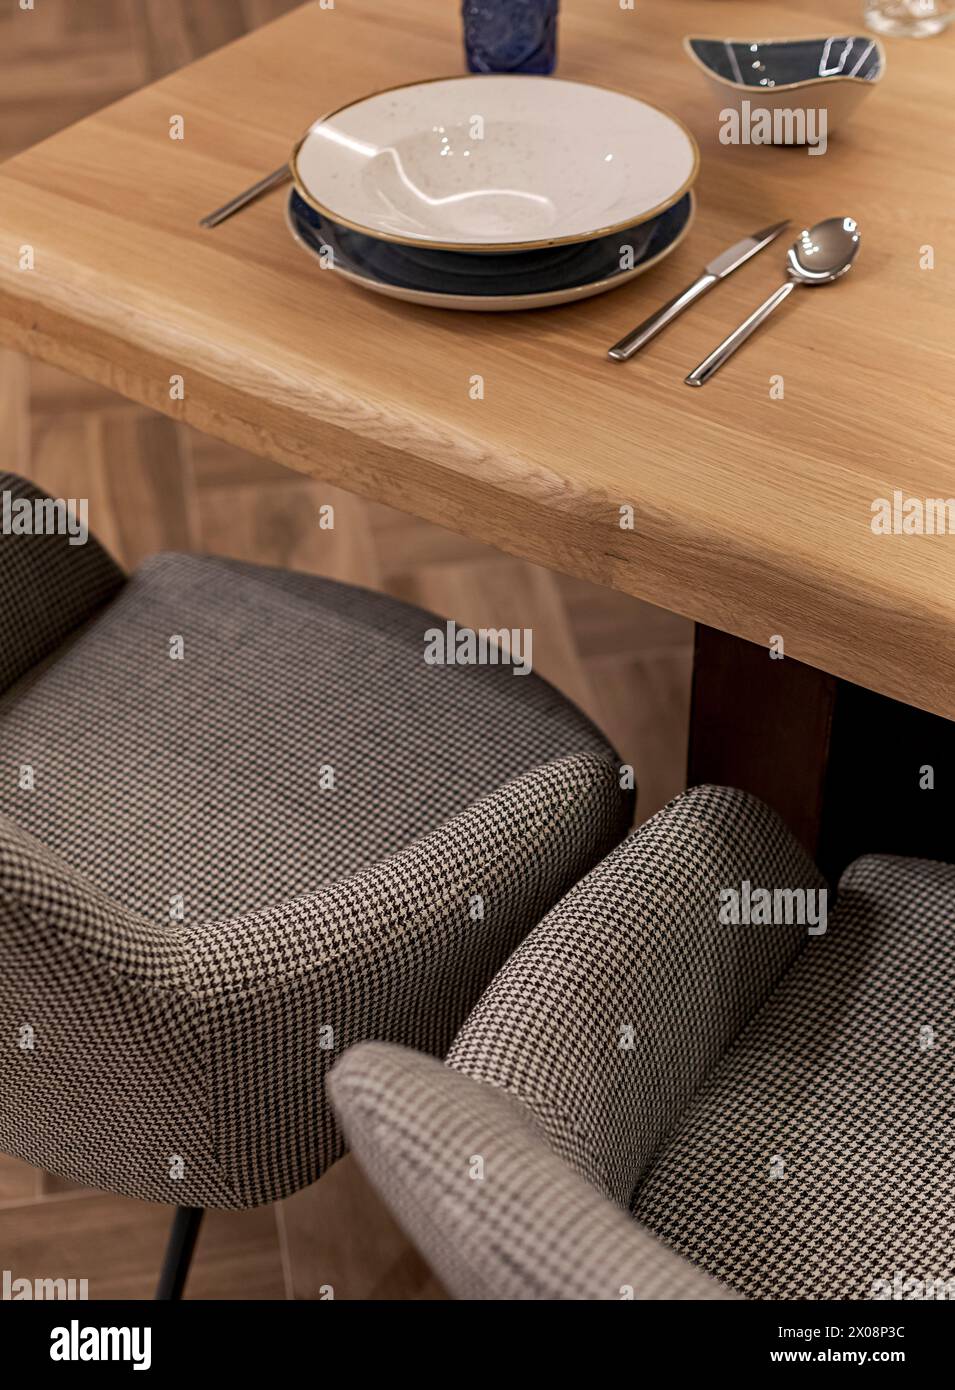 A stylish table setting featuring a wooden dining table with elegant dinnerware and comfortable patterned chairs in a warm, inviting atmosphere Stock Photo